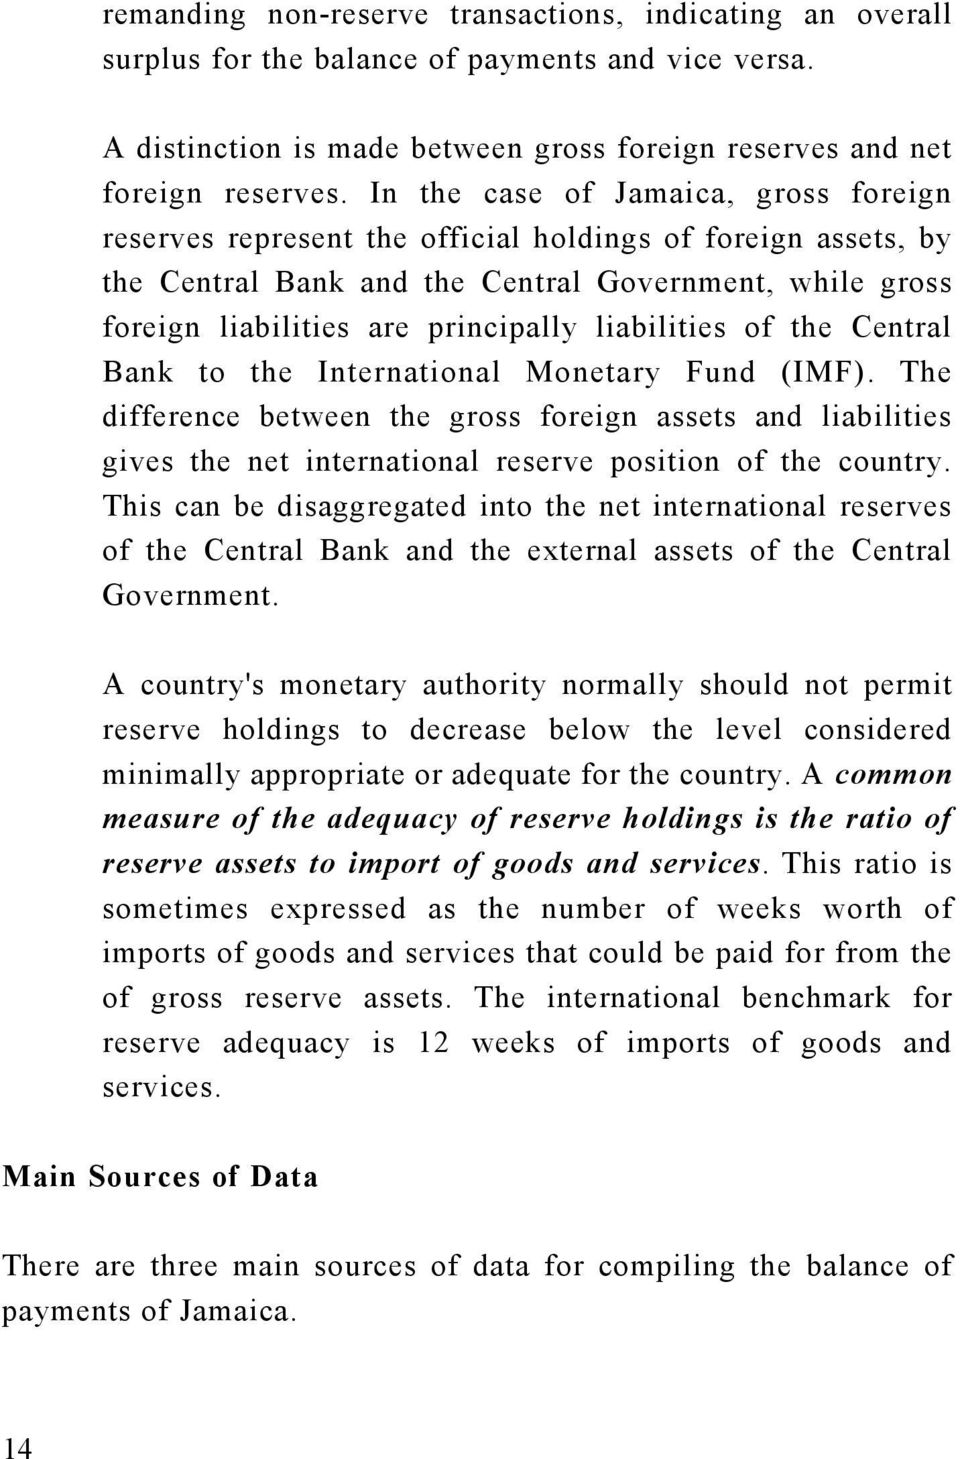 liabilities of the Central Bank to the International Monetary Fund (IMF). The difference between the gross foreign assets and liabilities gives the net international reserve position of the country.